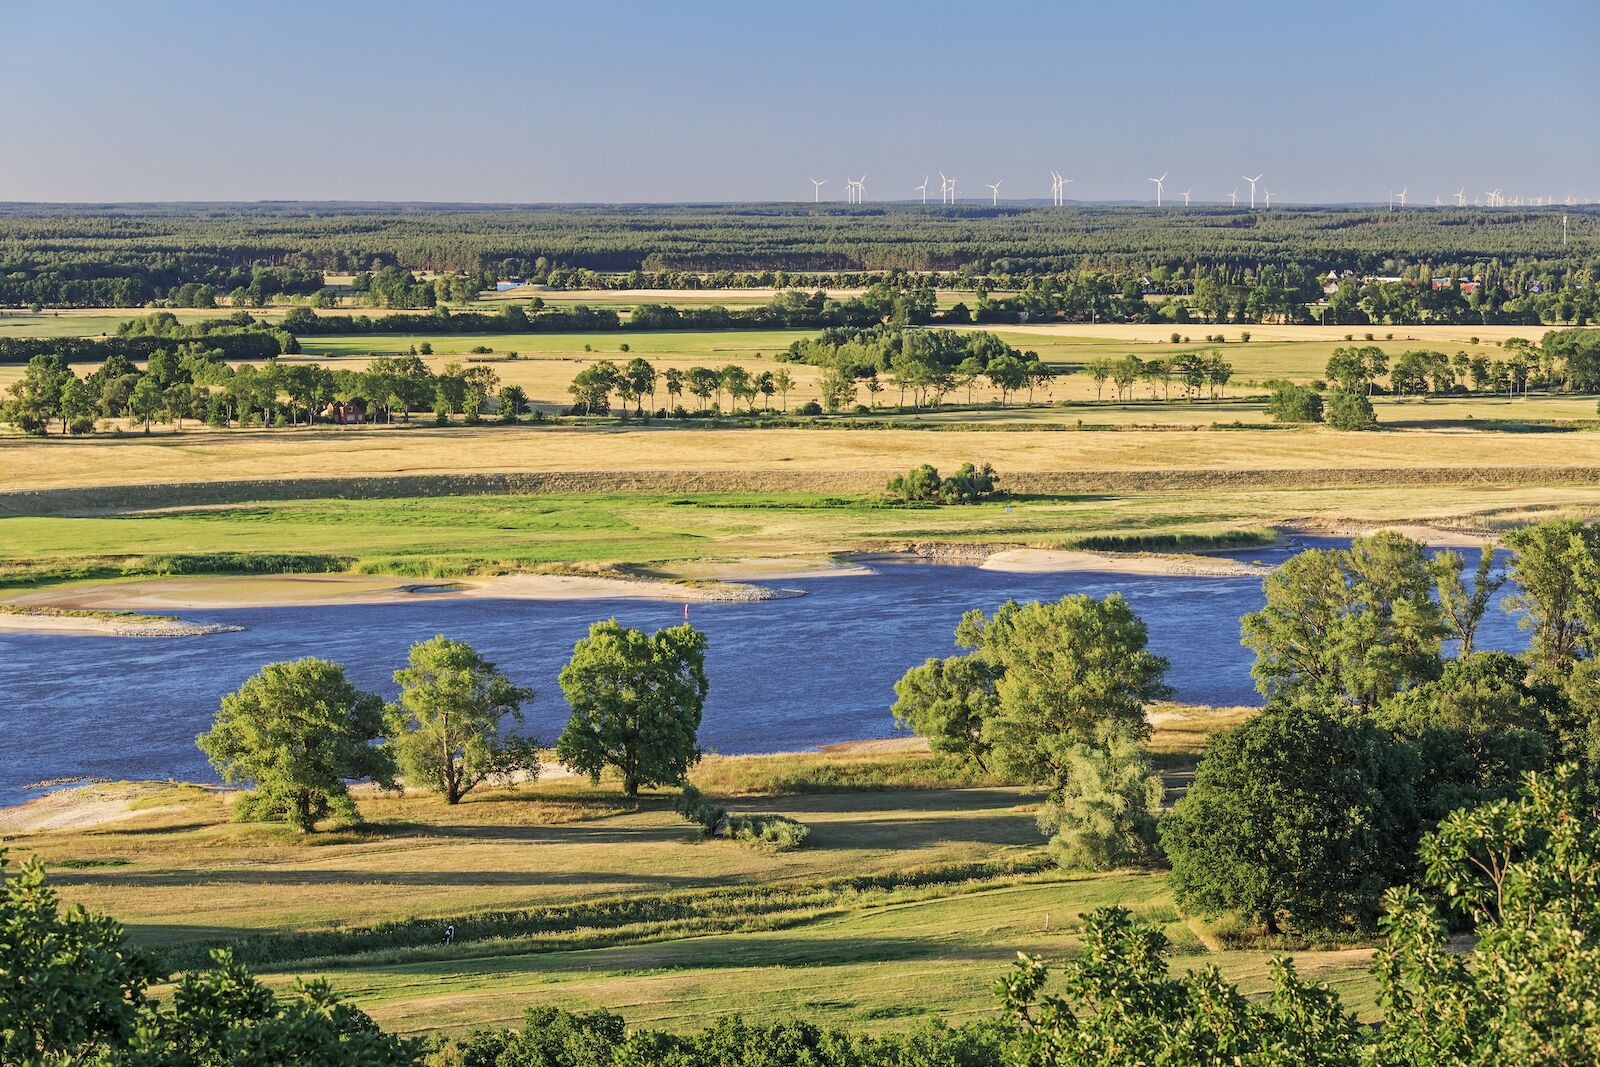 Valley of the river Elbe near Höhbeck in Lower Saxony (Brandenburg on the far side of the river), Germany, with pastures, meadows and forests. Biosphere reserve river landscape Elbe.